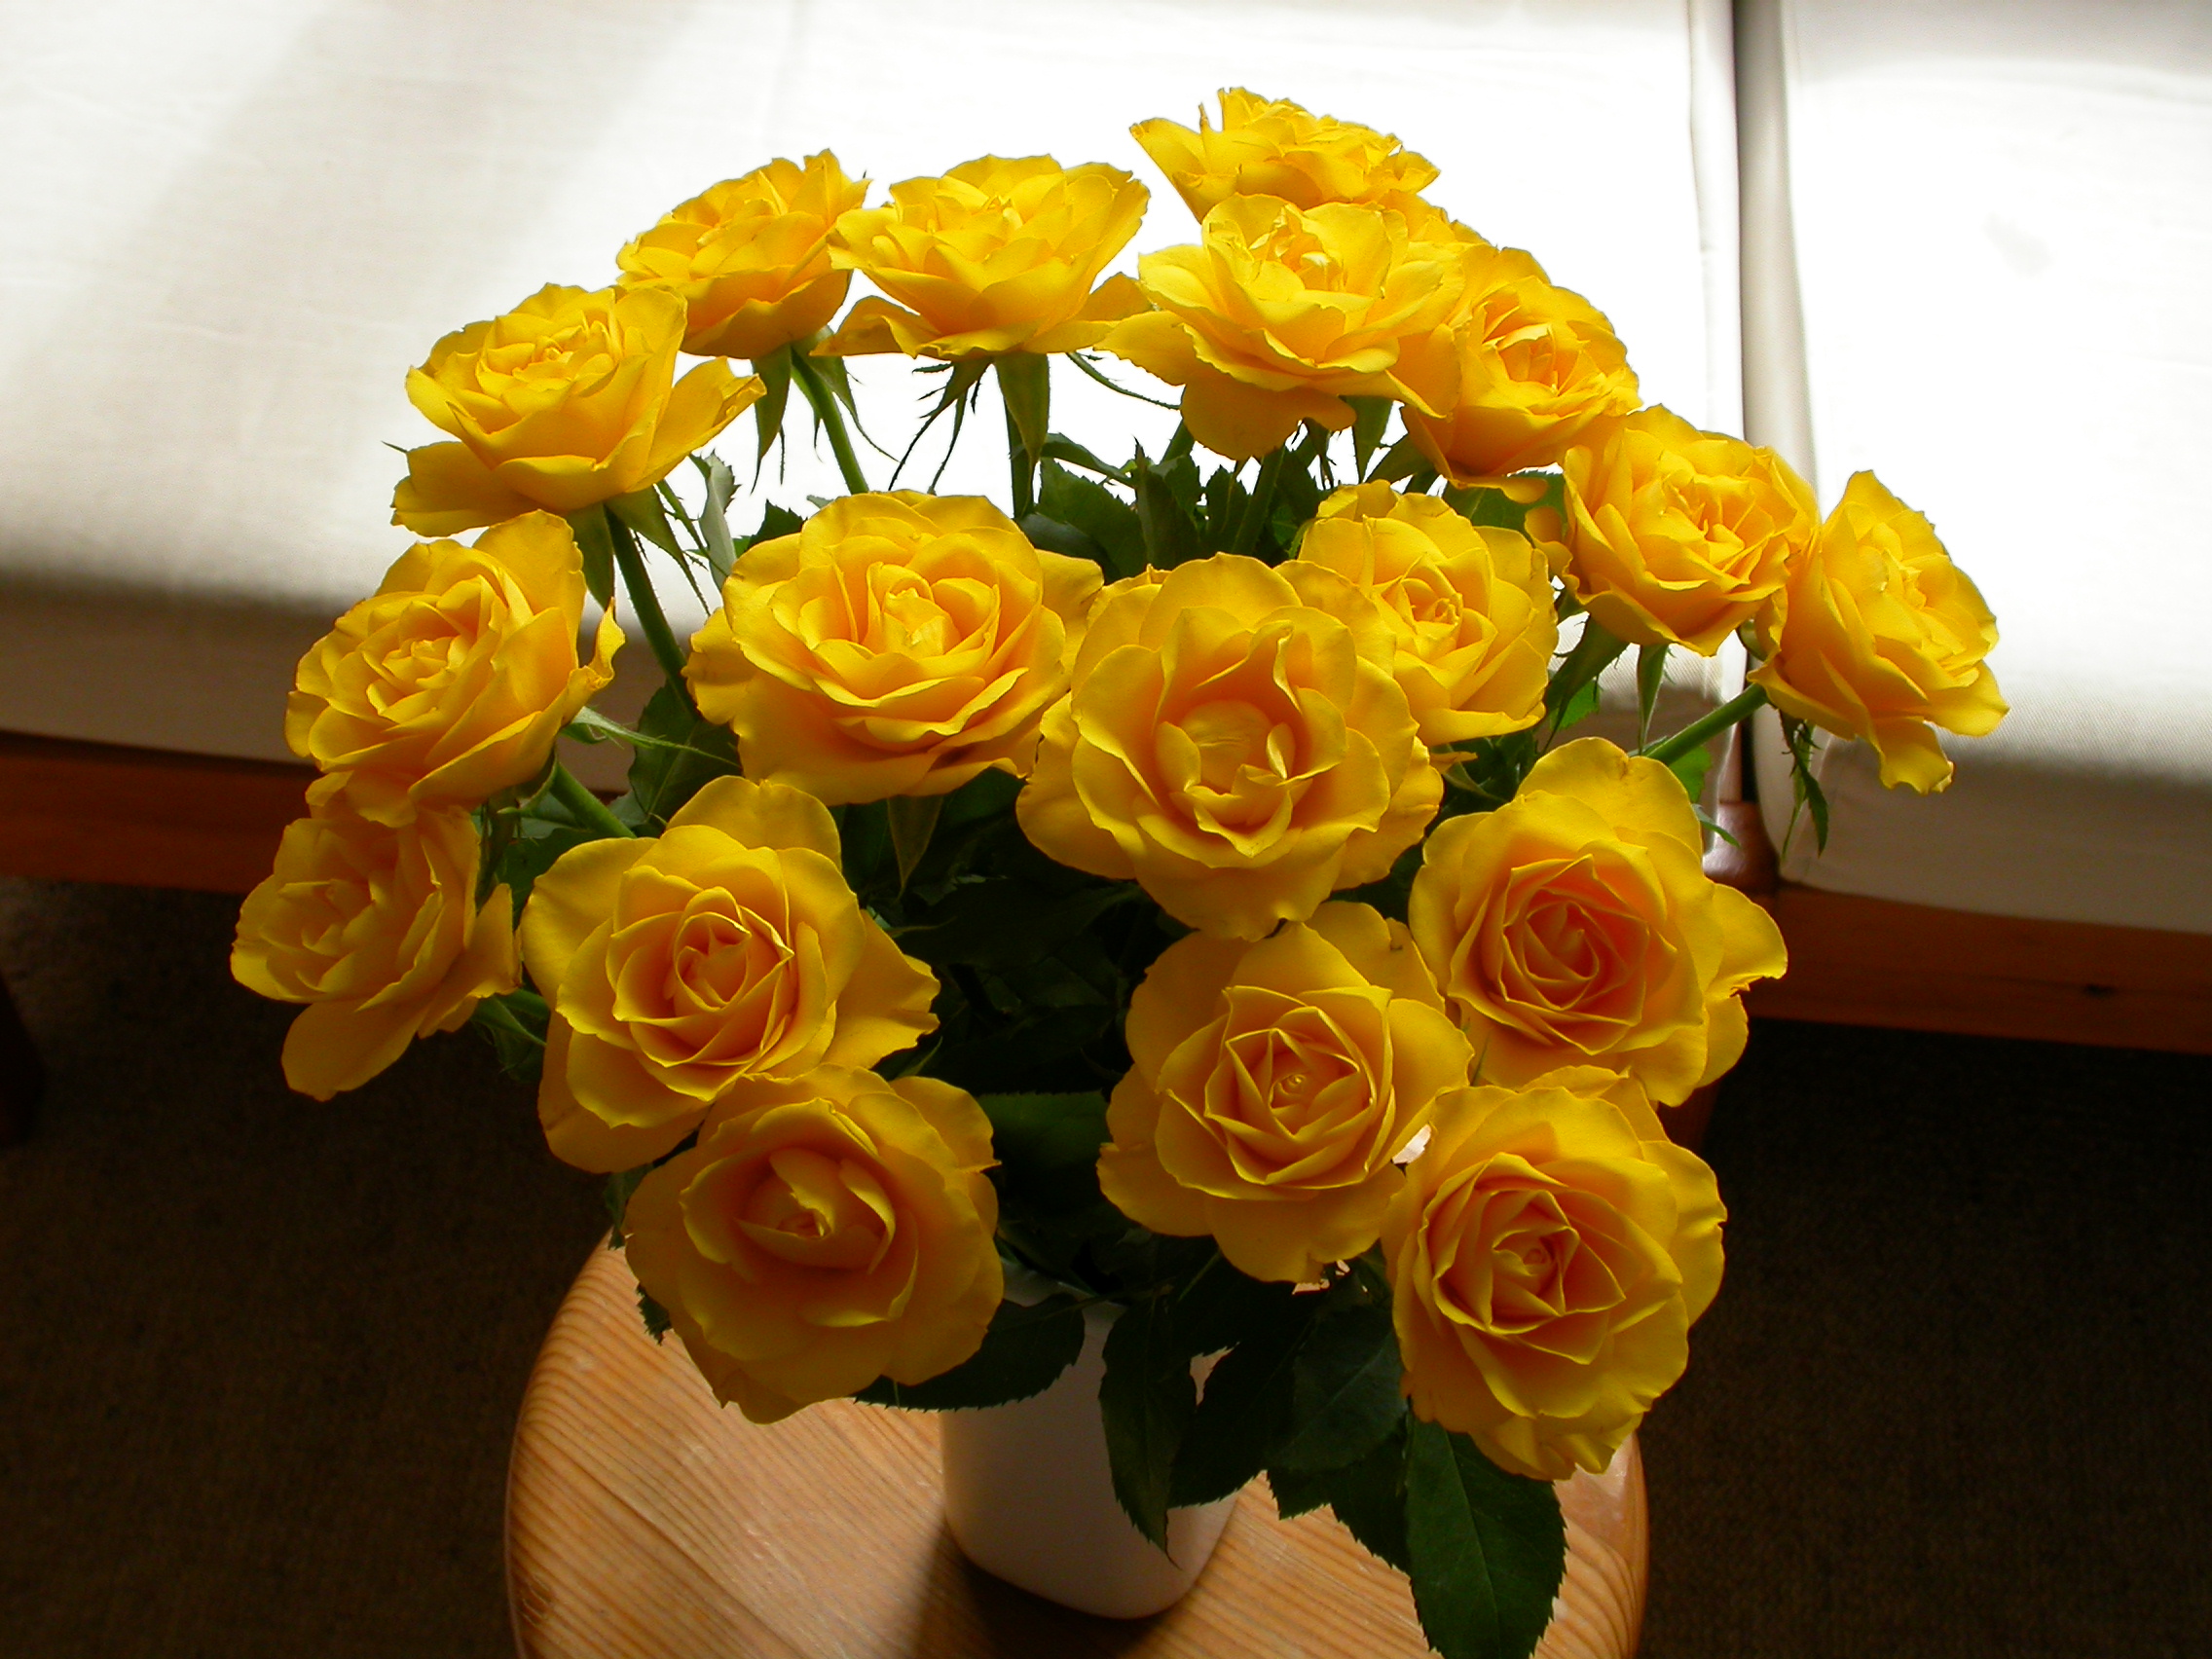 paul flowers rose roses yellow bouquet bunch of flowers